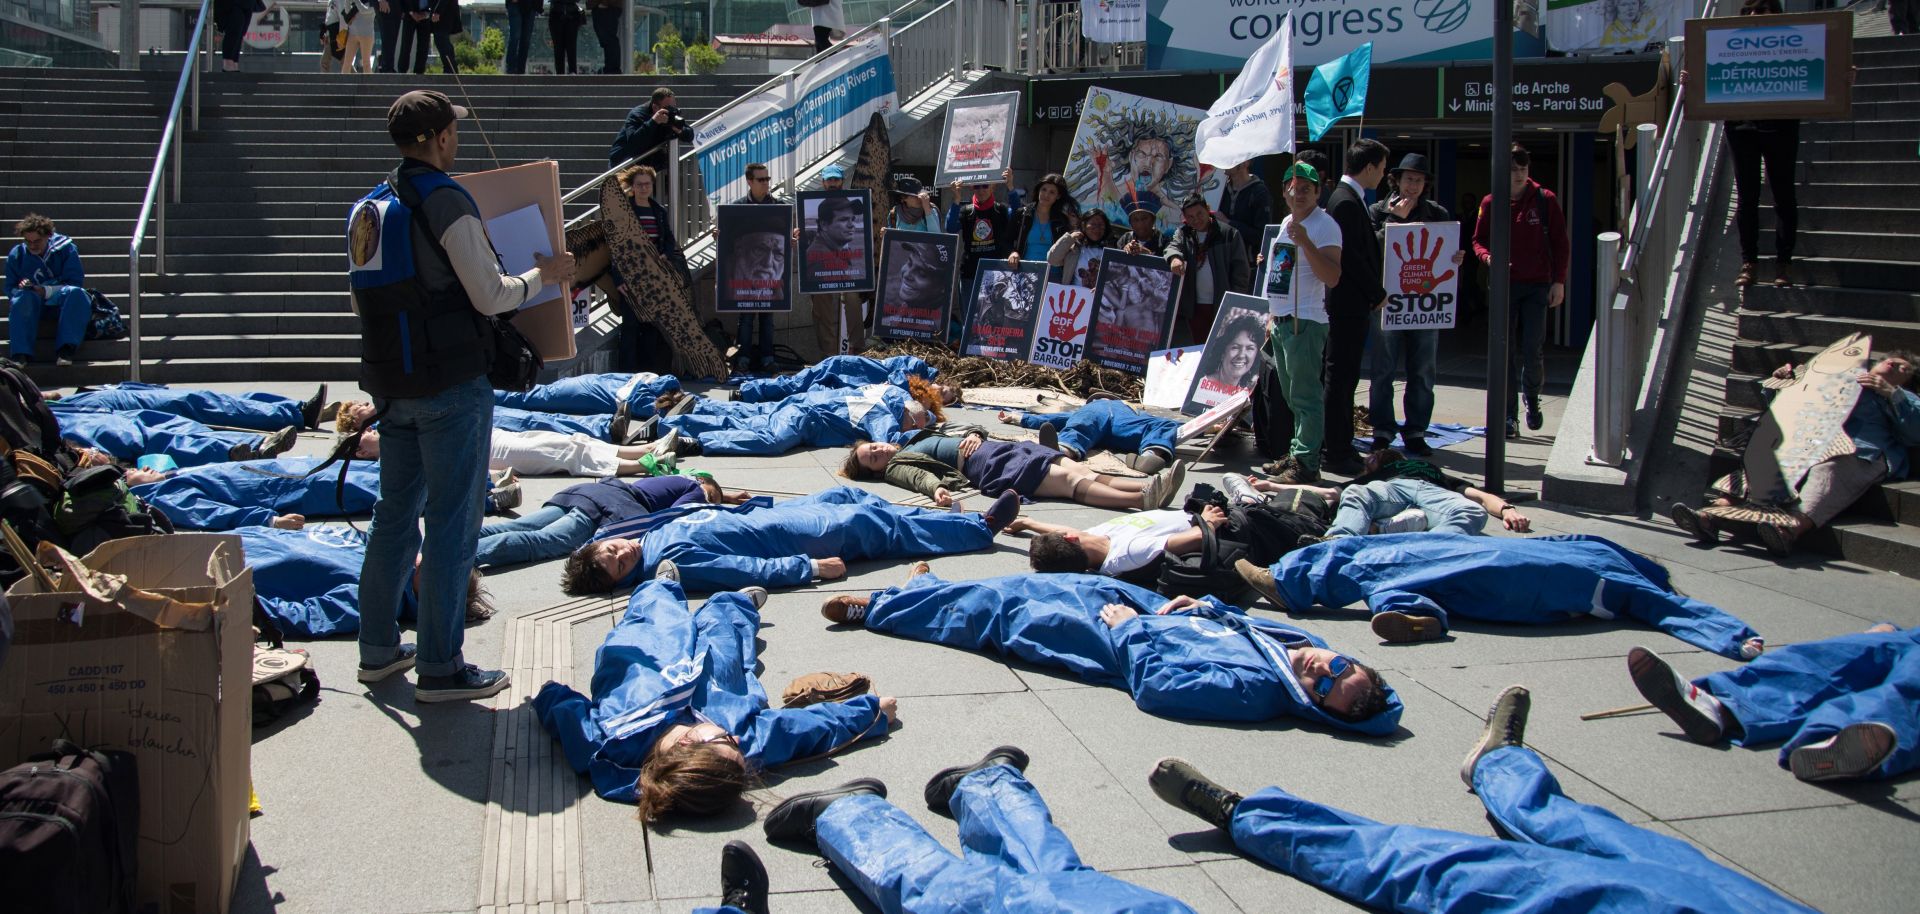 Extinction Rebellion and Planete Amazone activists stage a "die-in" on May 14, 2019, in front of the Grande Arche de La Defense in Puteaux, northwest of Paris.